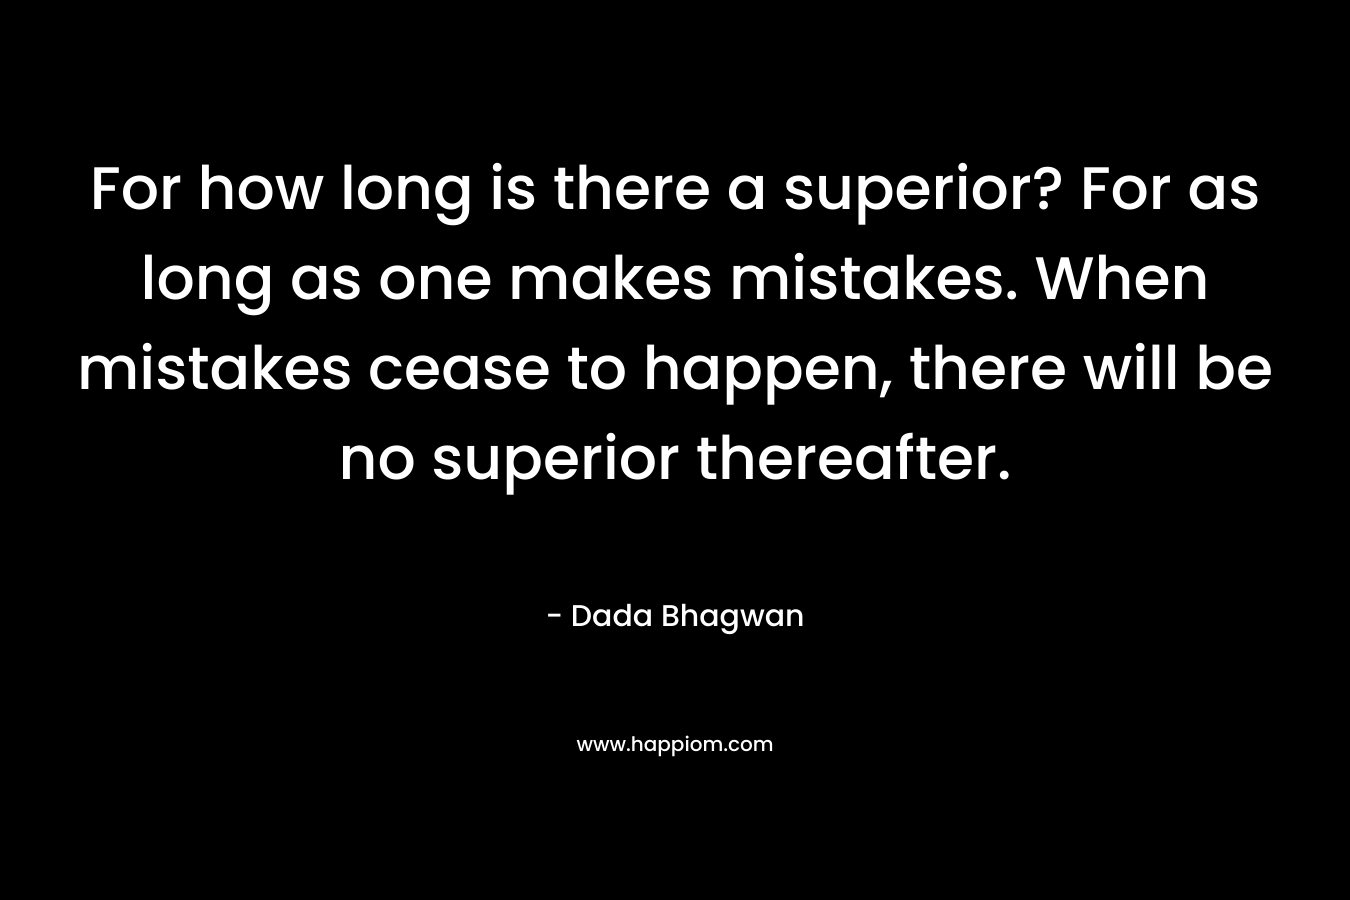 For how long is there a superior? For as long as one makes mistakes. When mistakes cease to happen, there will be no superior thereafter.